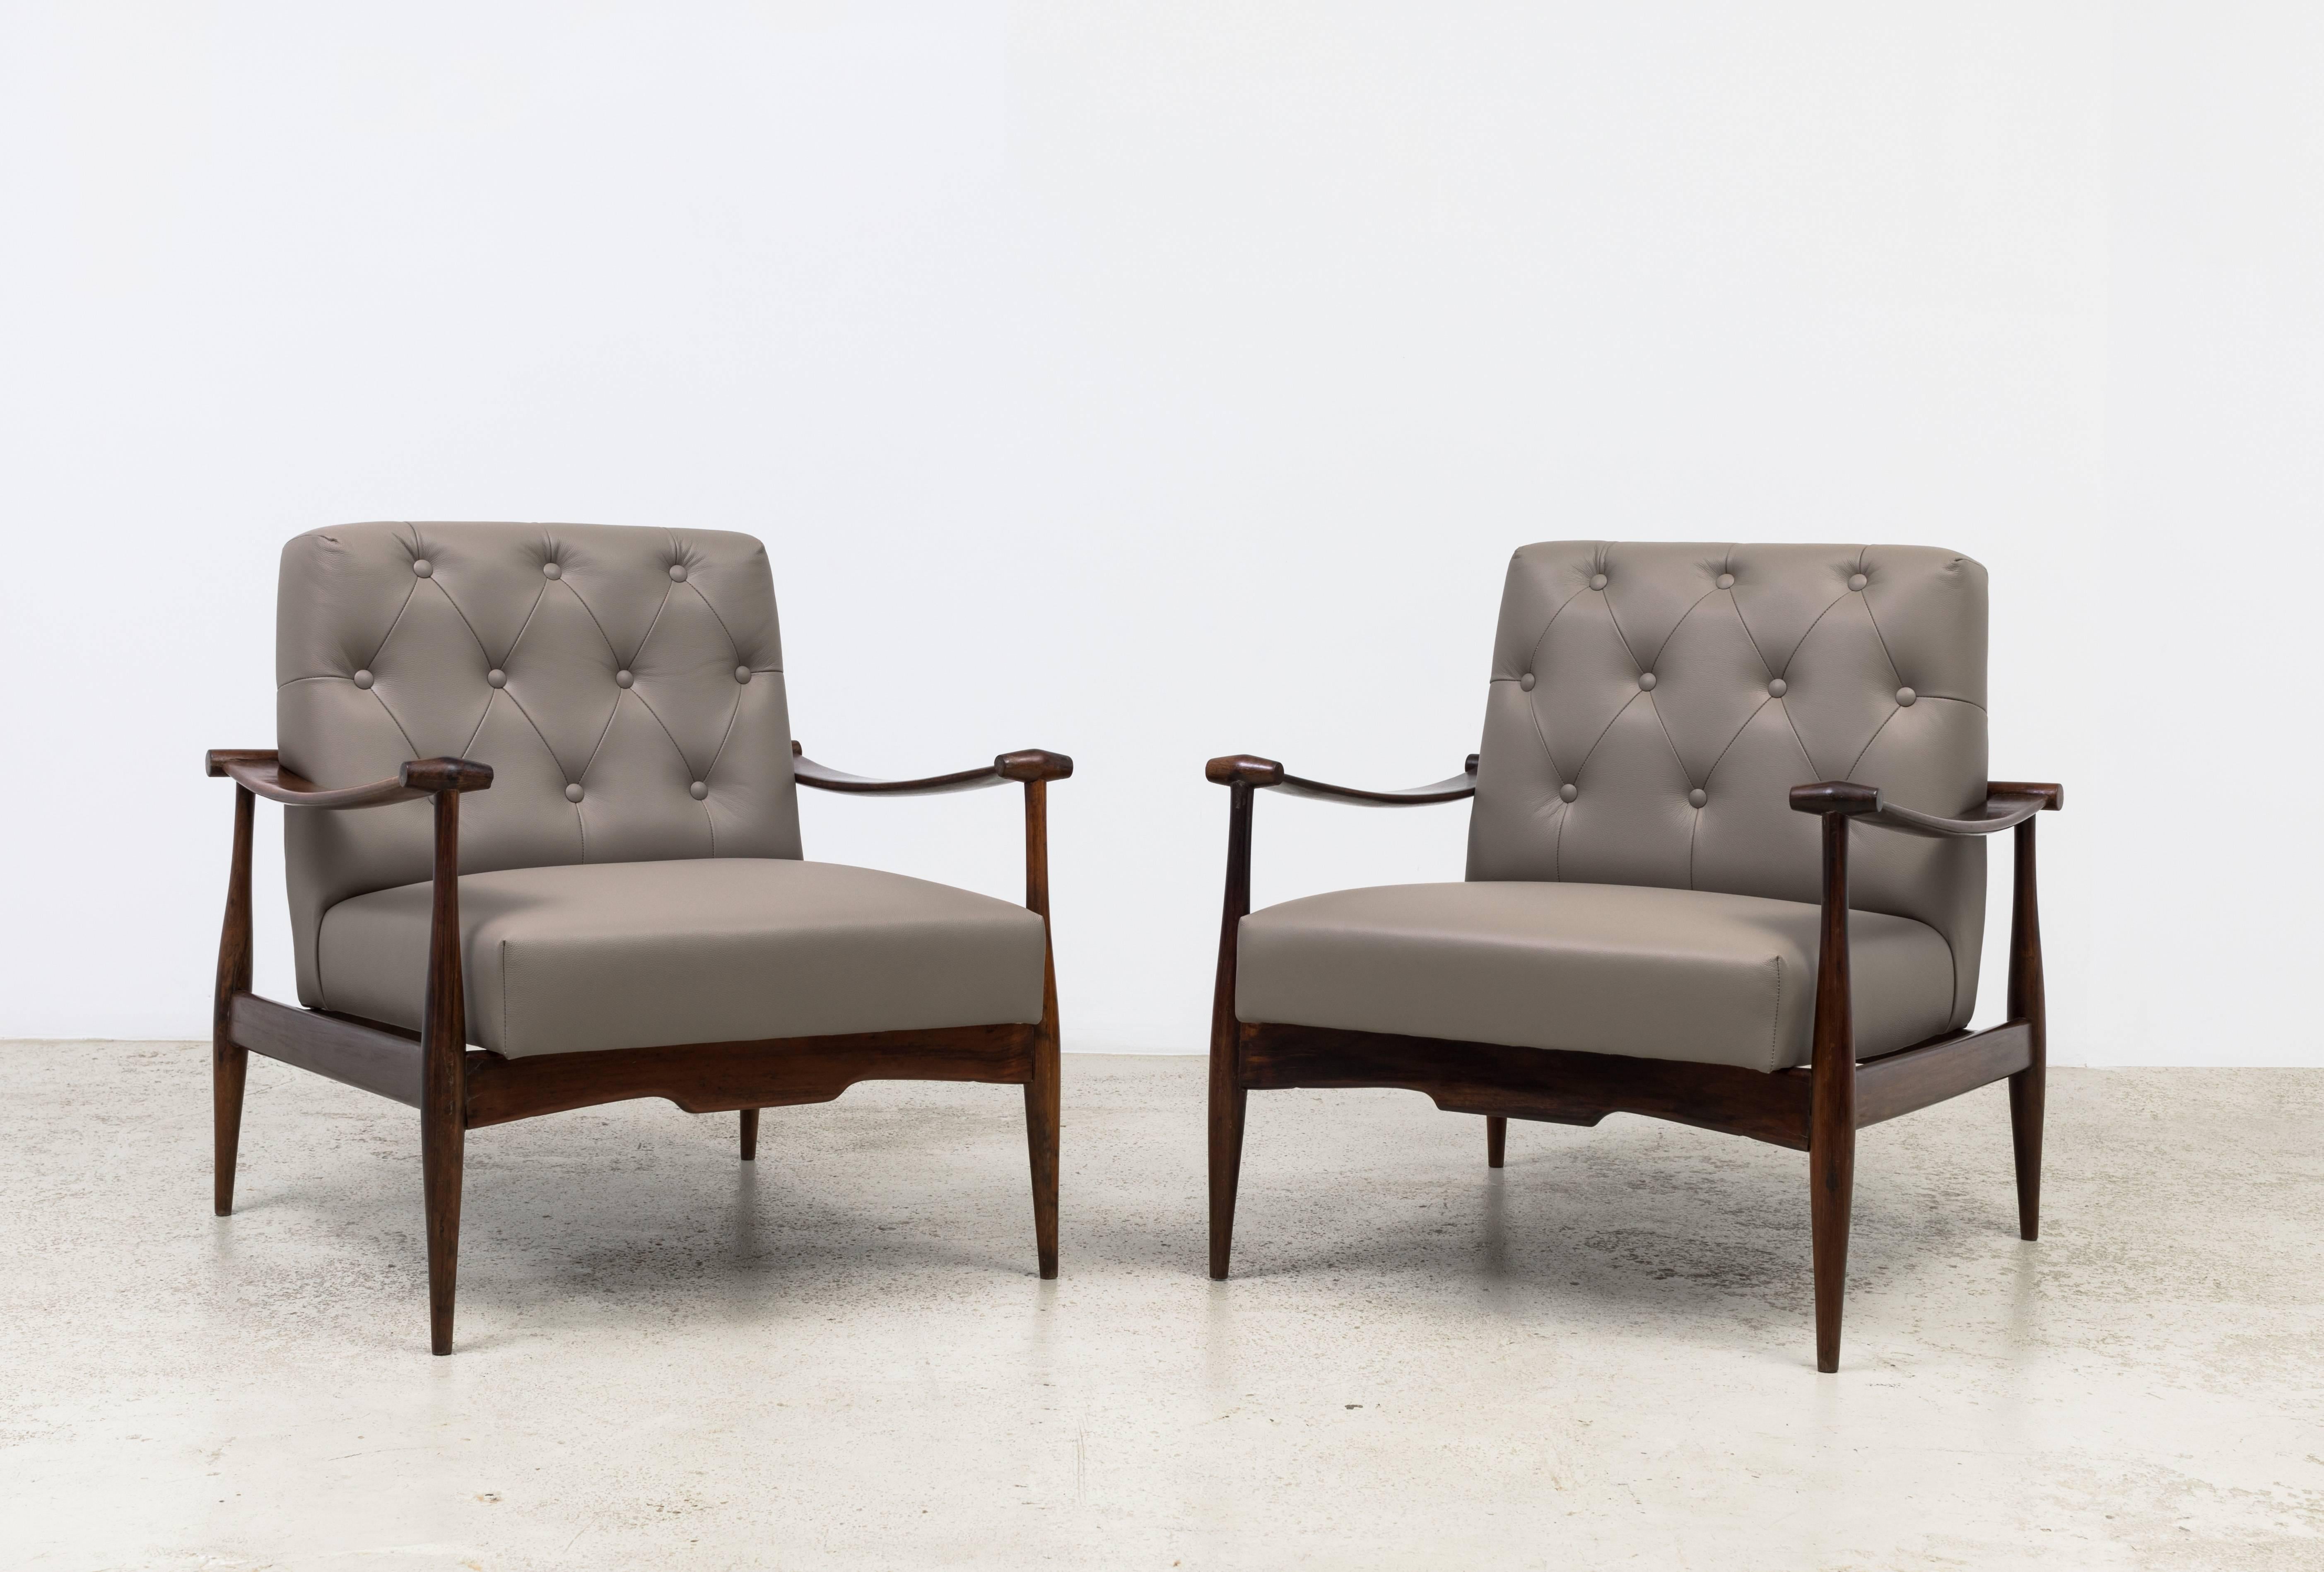 Pair of vintage armchairs designed by 'Liceu de Artes e Ofícios' in the 1950s.
Made of jacaranda wood and leather upholstery.